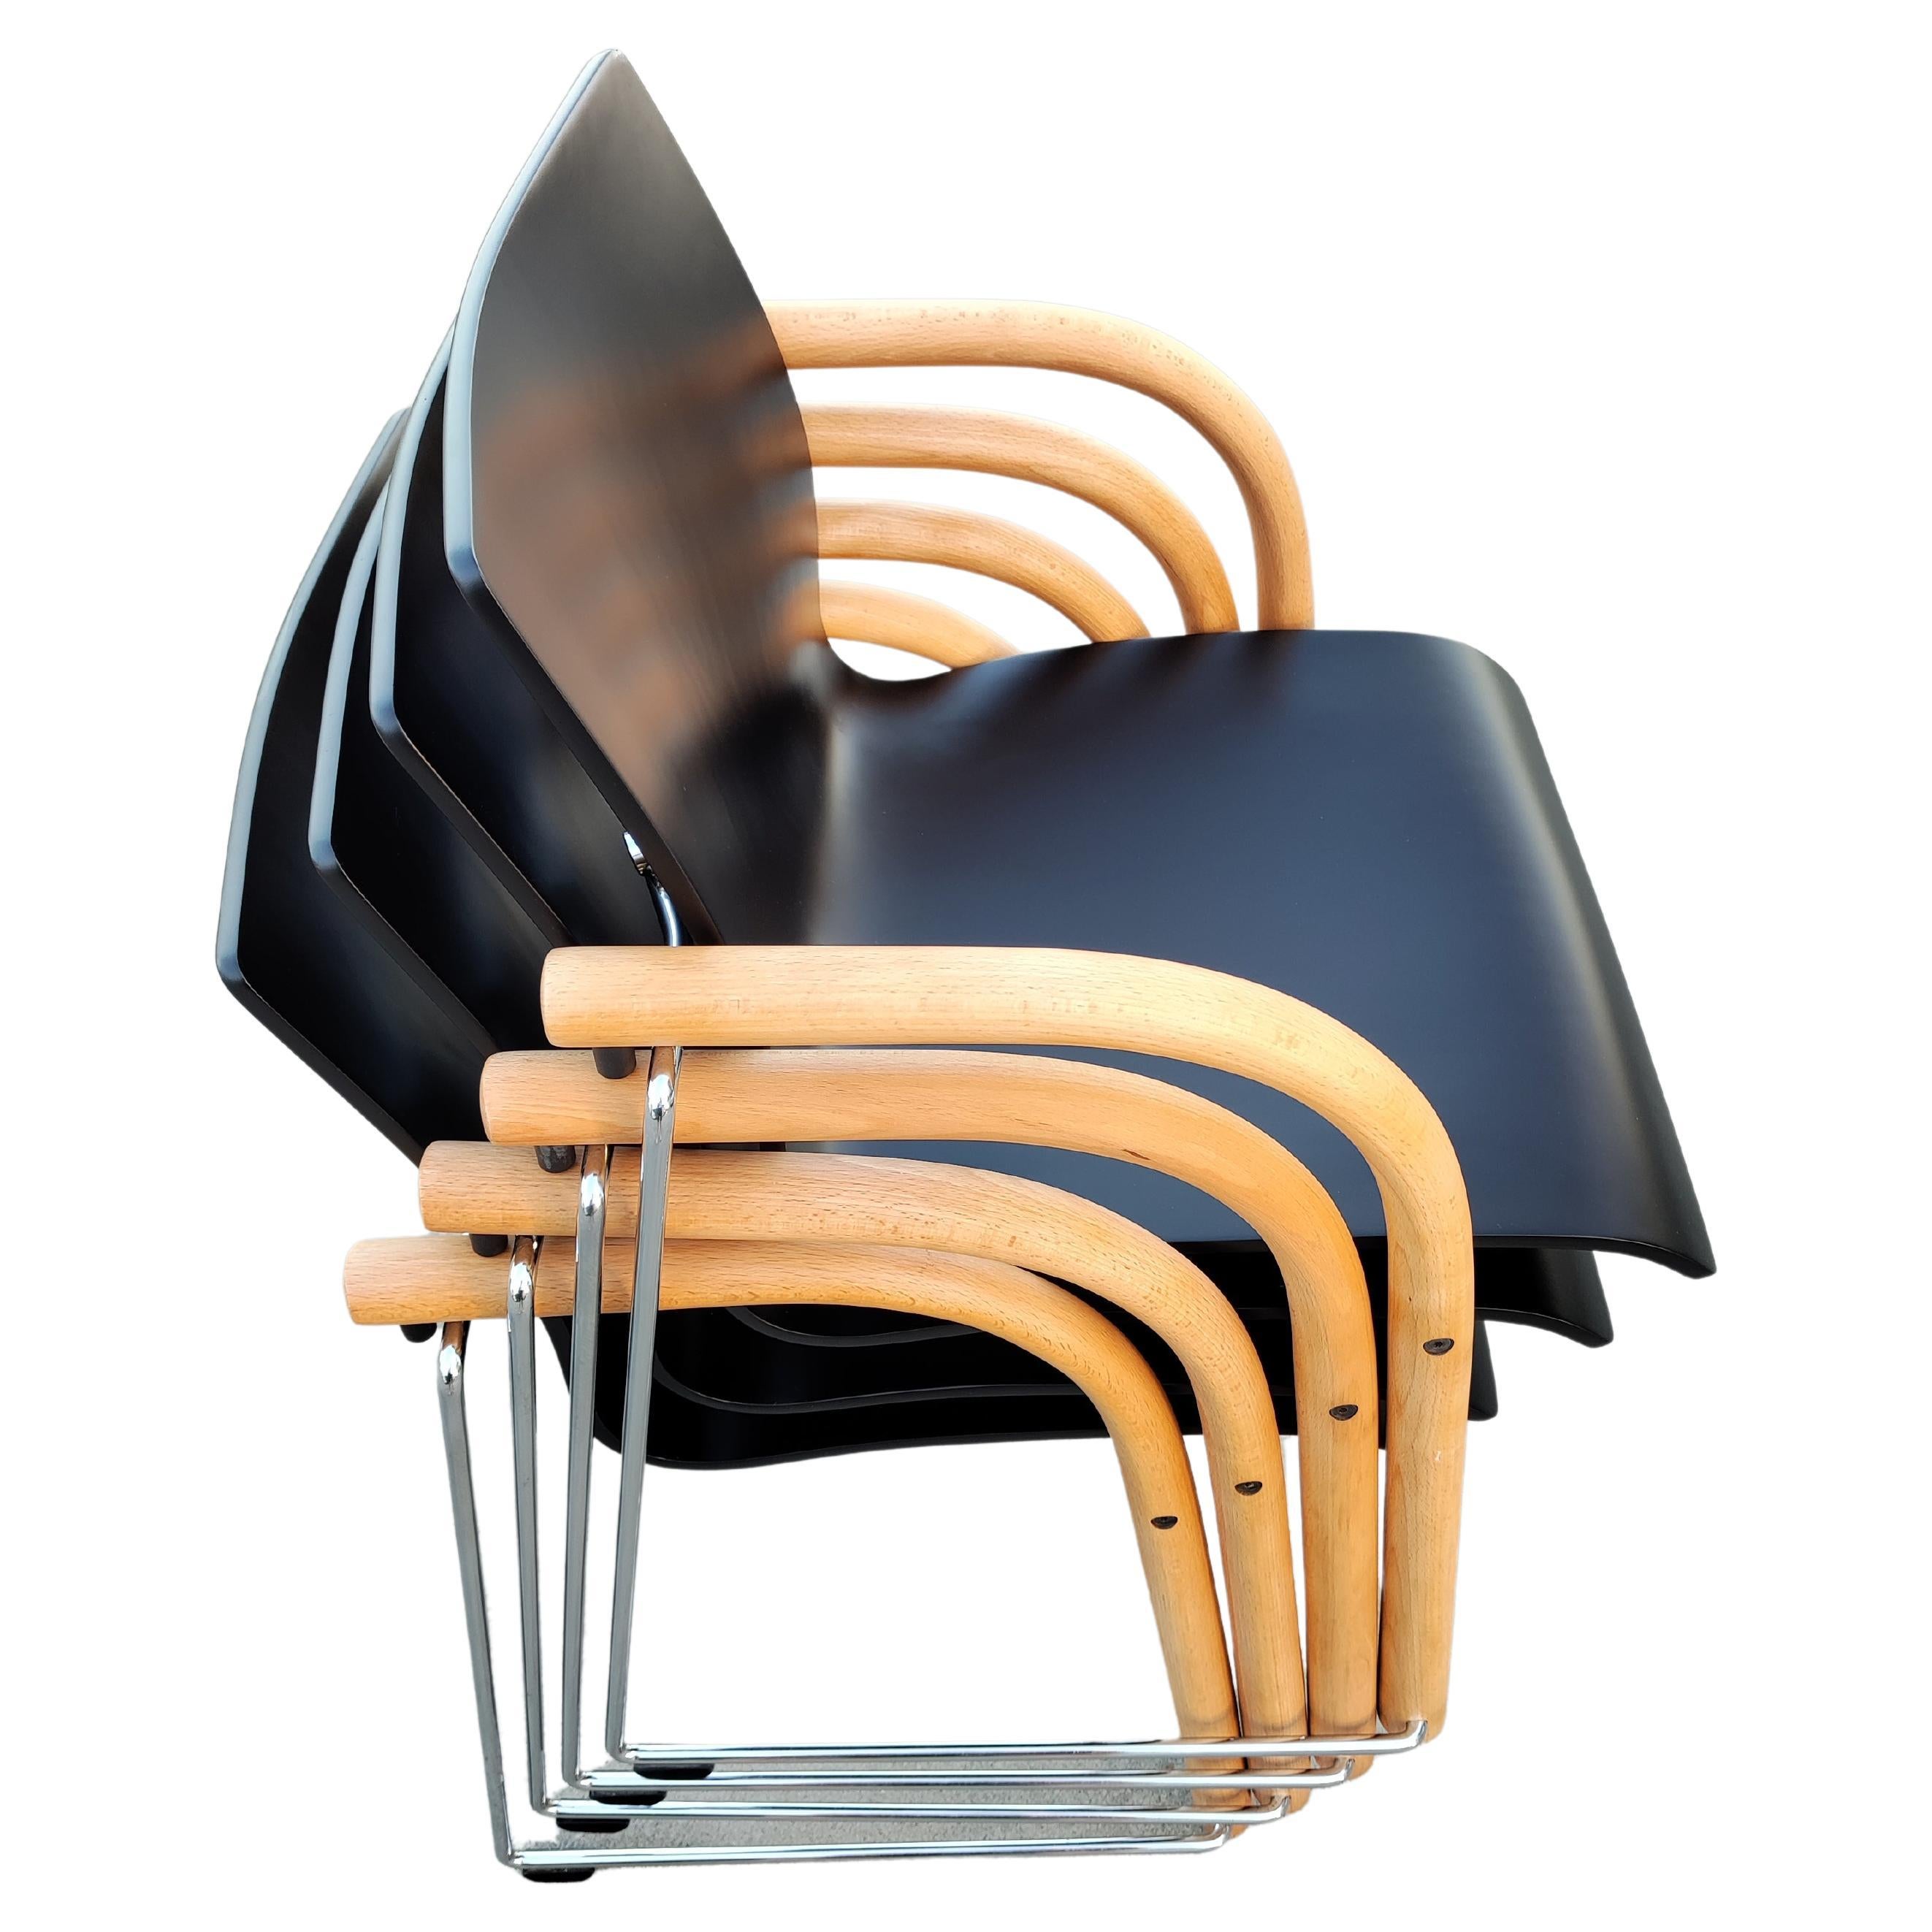 In this listing you will find a set of 4 Thonet Dining Chairs Model S320, designed by by Wulf Schneider and Ulrich Bohme. Chairs are stackable. Fully refurbished.

When purchased the chairs will be carefully wrapped up and packed in a way to avoid